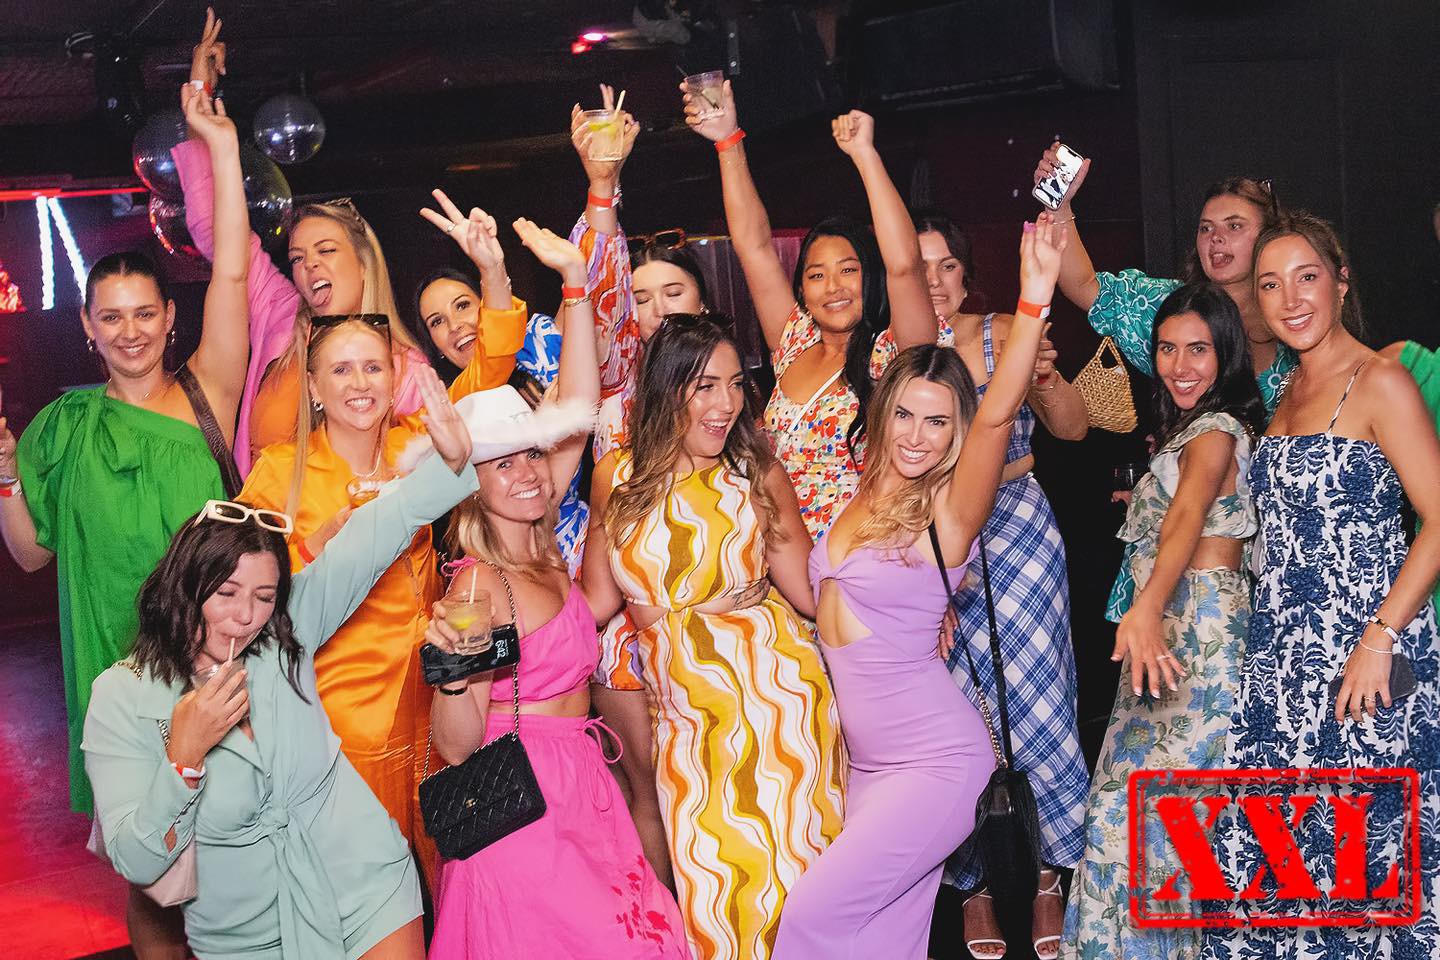 How to Plan Classy Hens Party Ideas in Sydney?